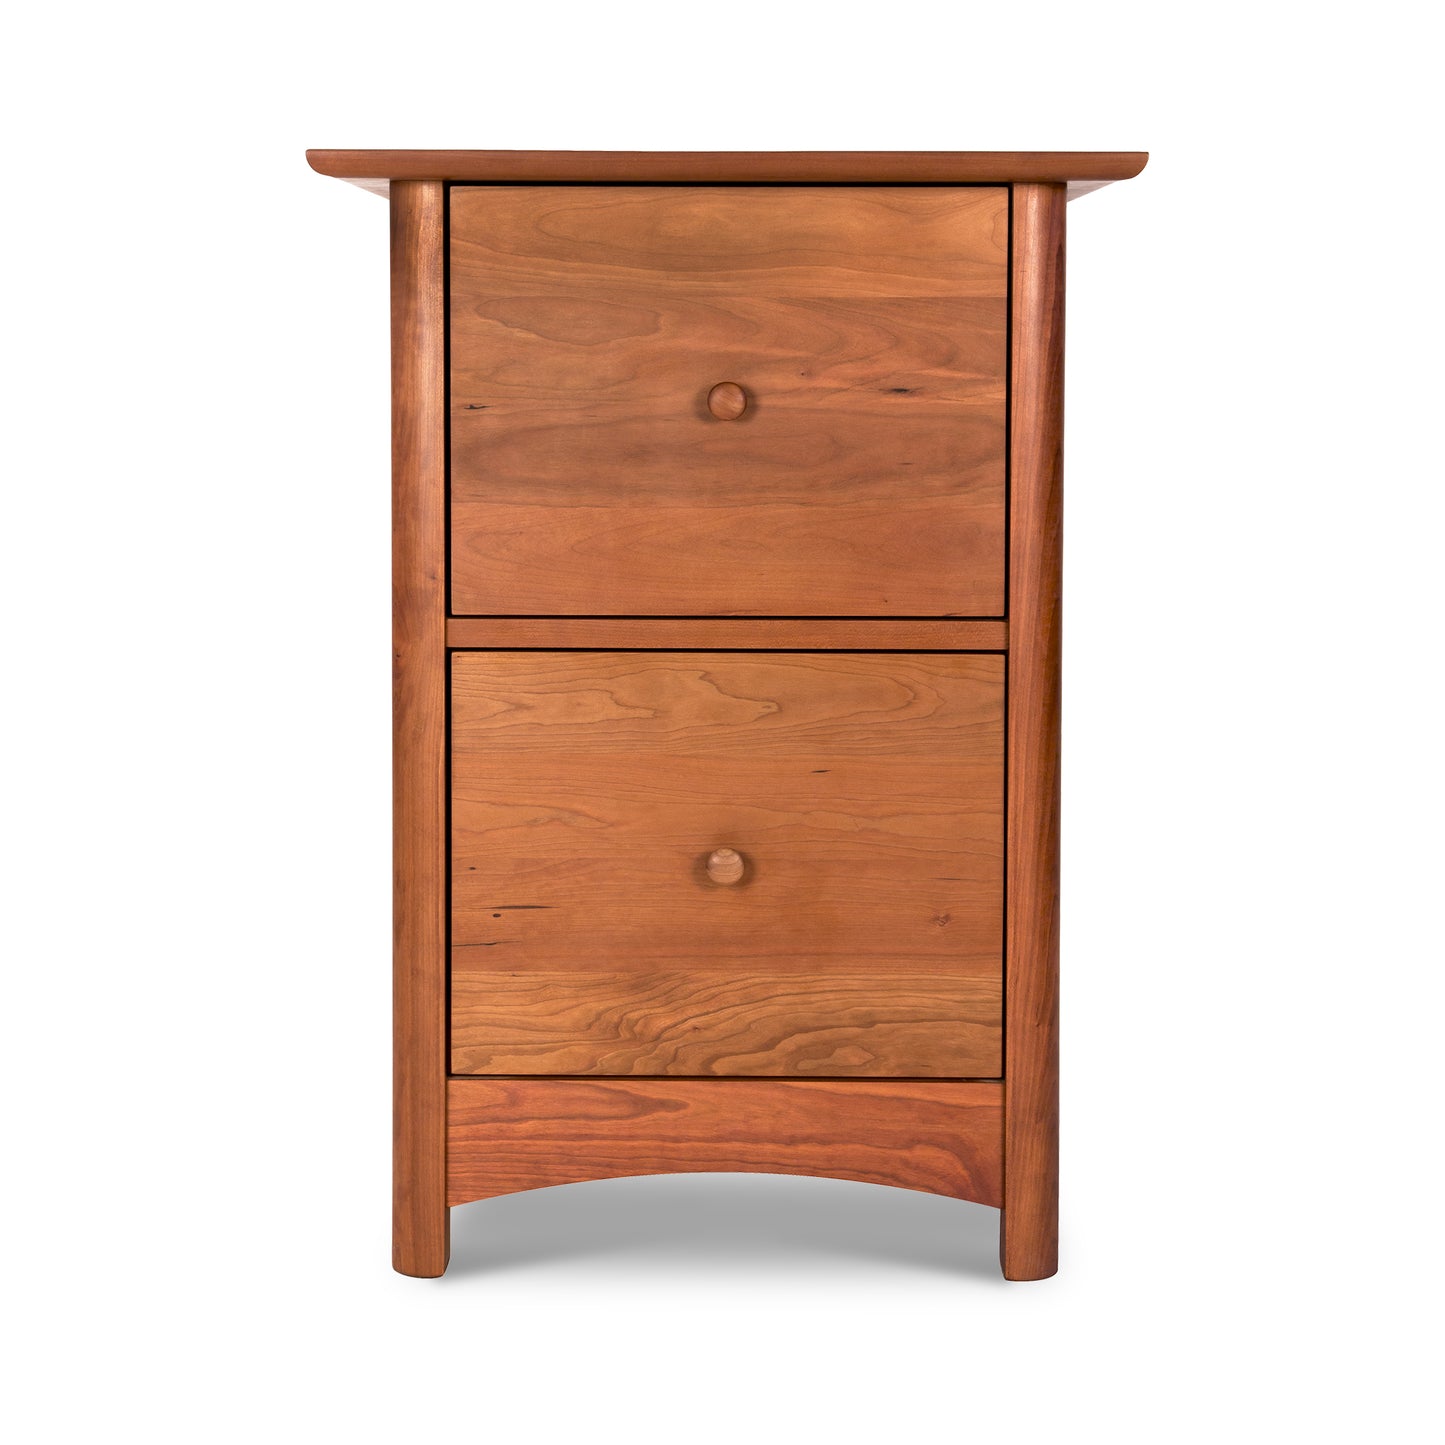 Heartwood Shaker Style two-drawer nightstand isolated on a white background.
Product Name: Heartwood Shaker 2-Drawer Vertical File Cabinet
Brand Name: Vermont Furniture Designs